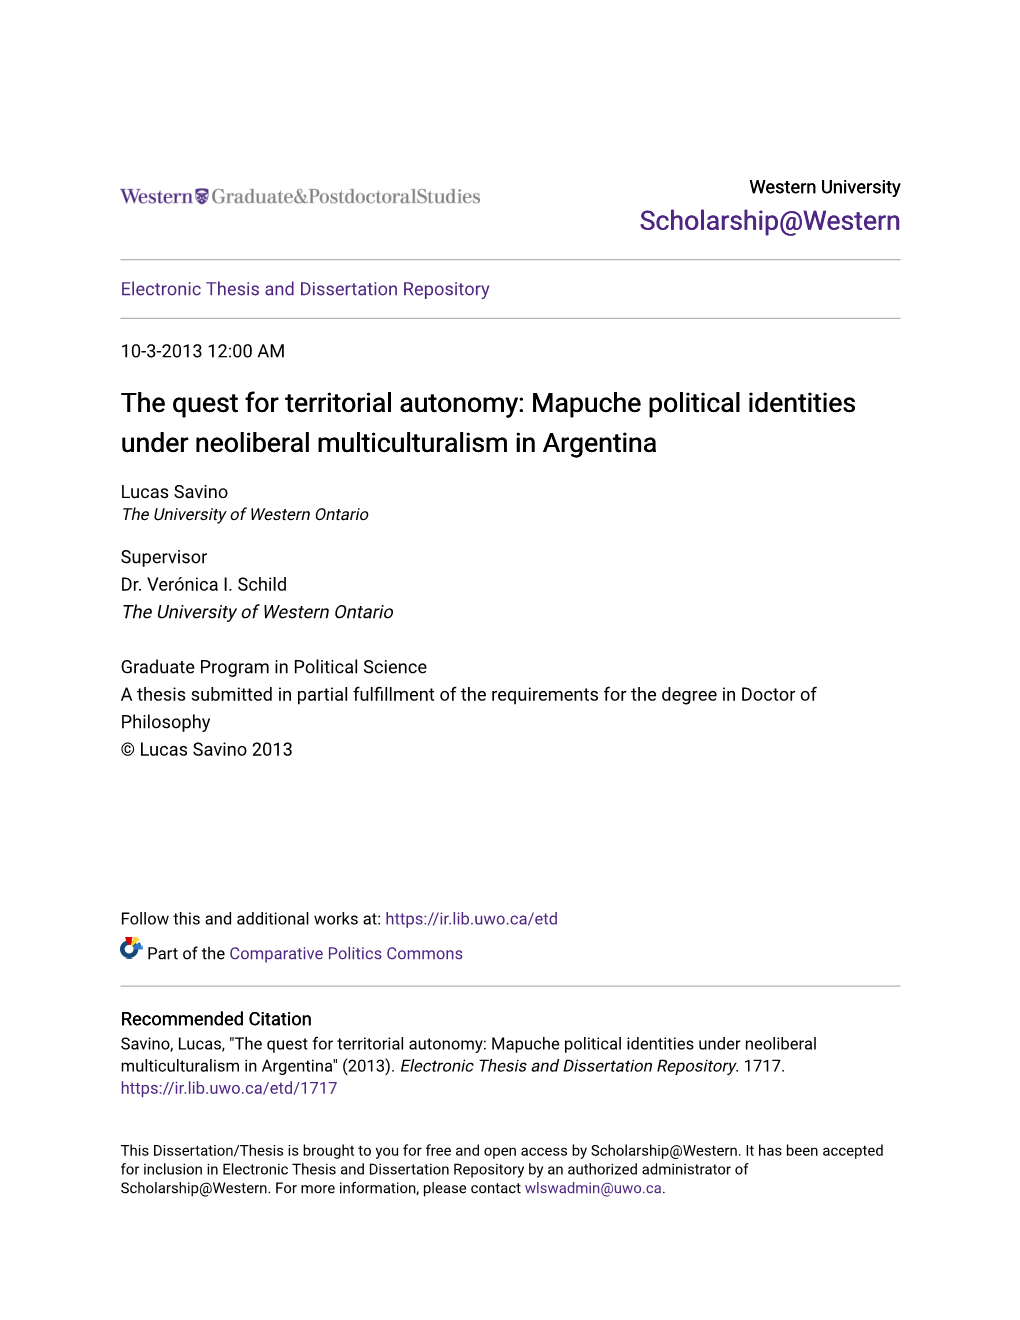 The Quest for Territorial Autonomy: Mapuche Political Identities Under Neoliberal Multiculturalism in Argentina